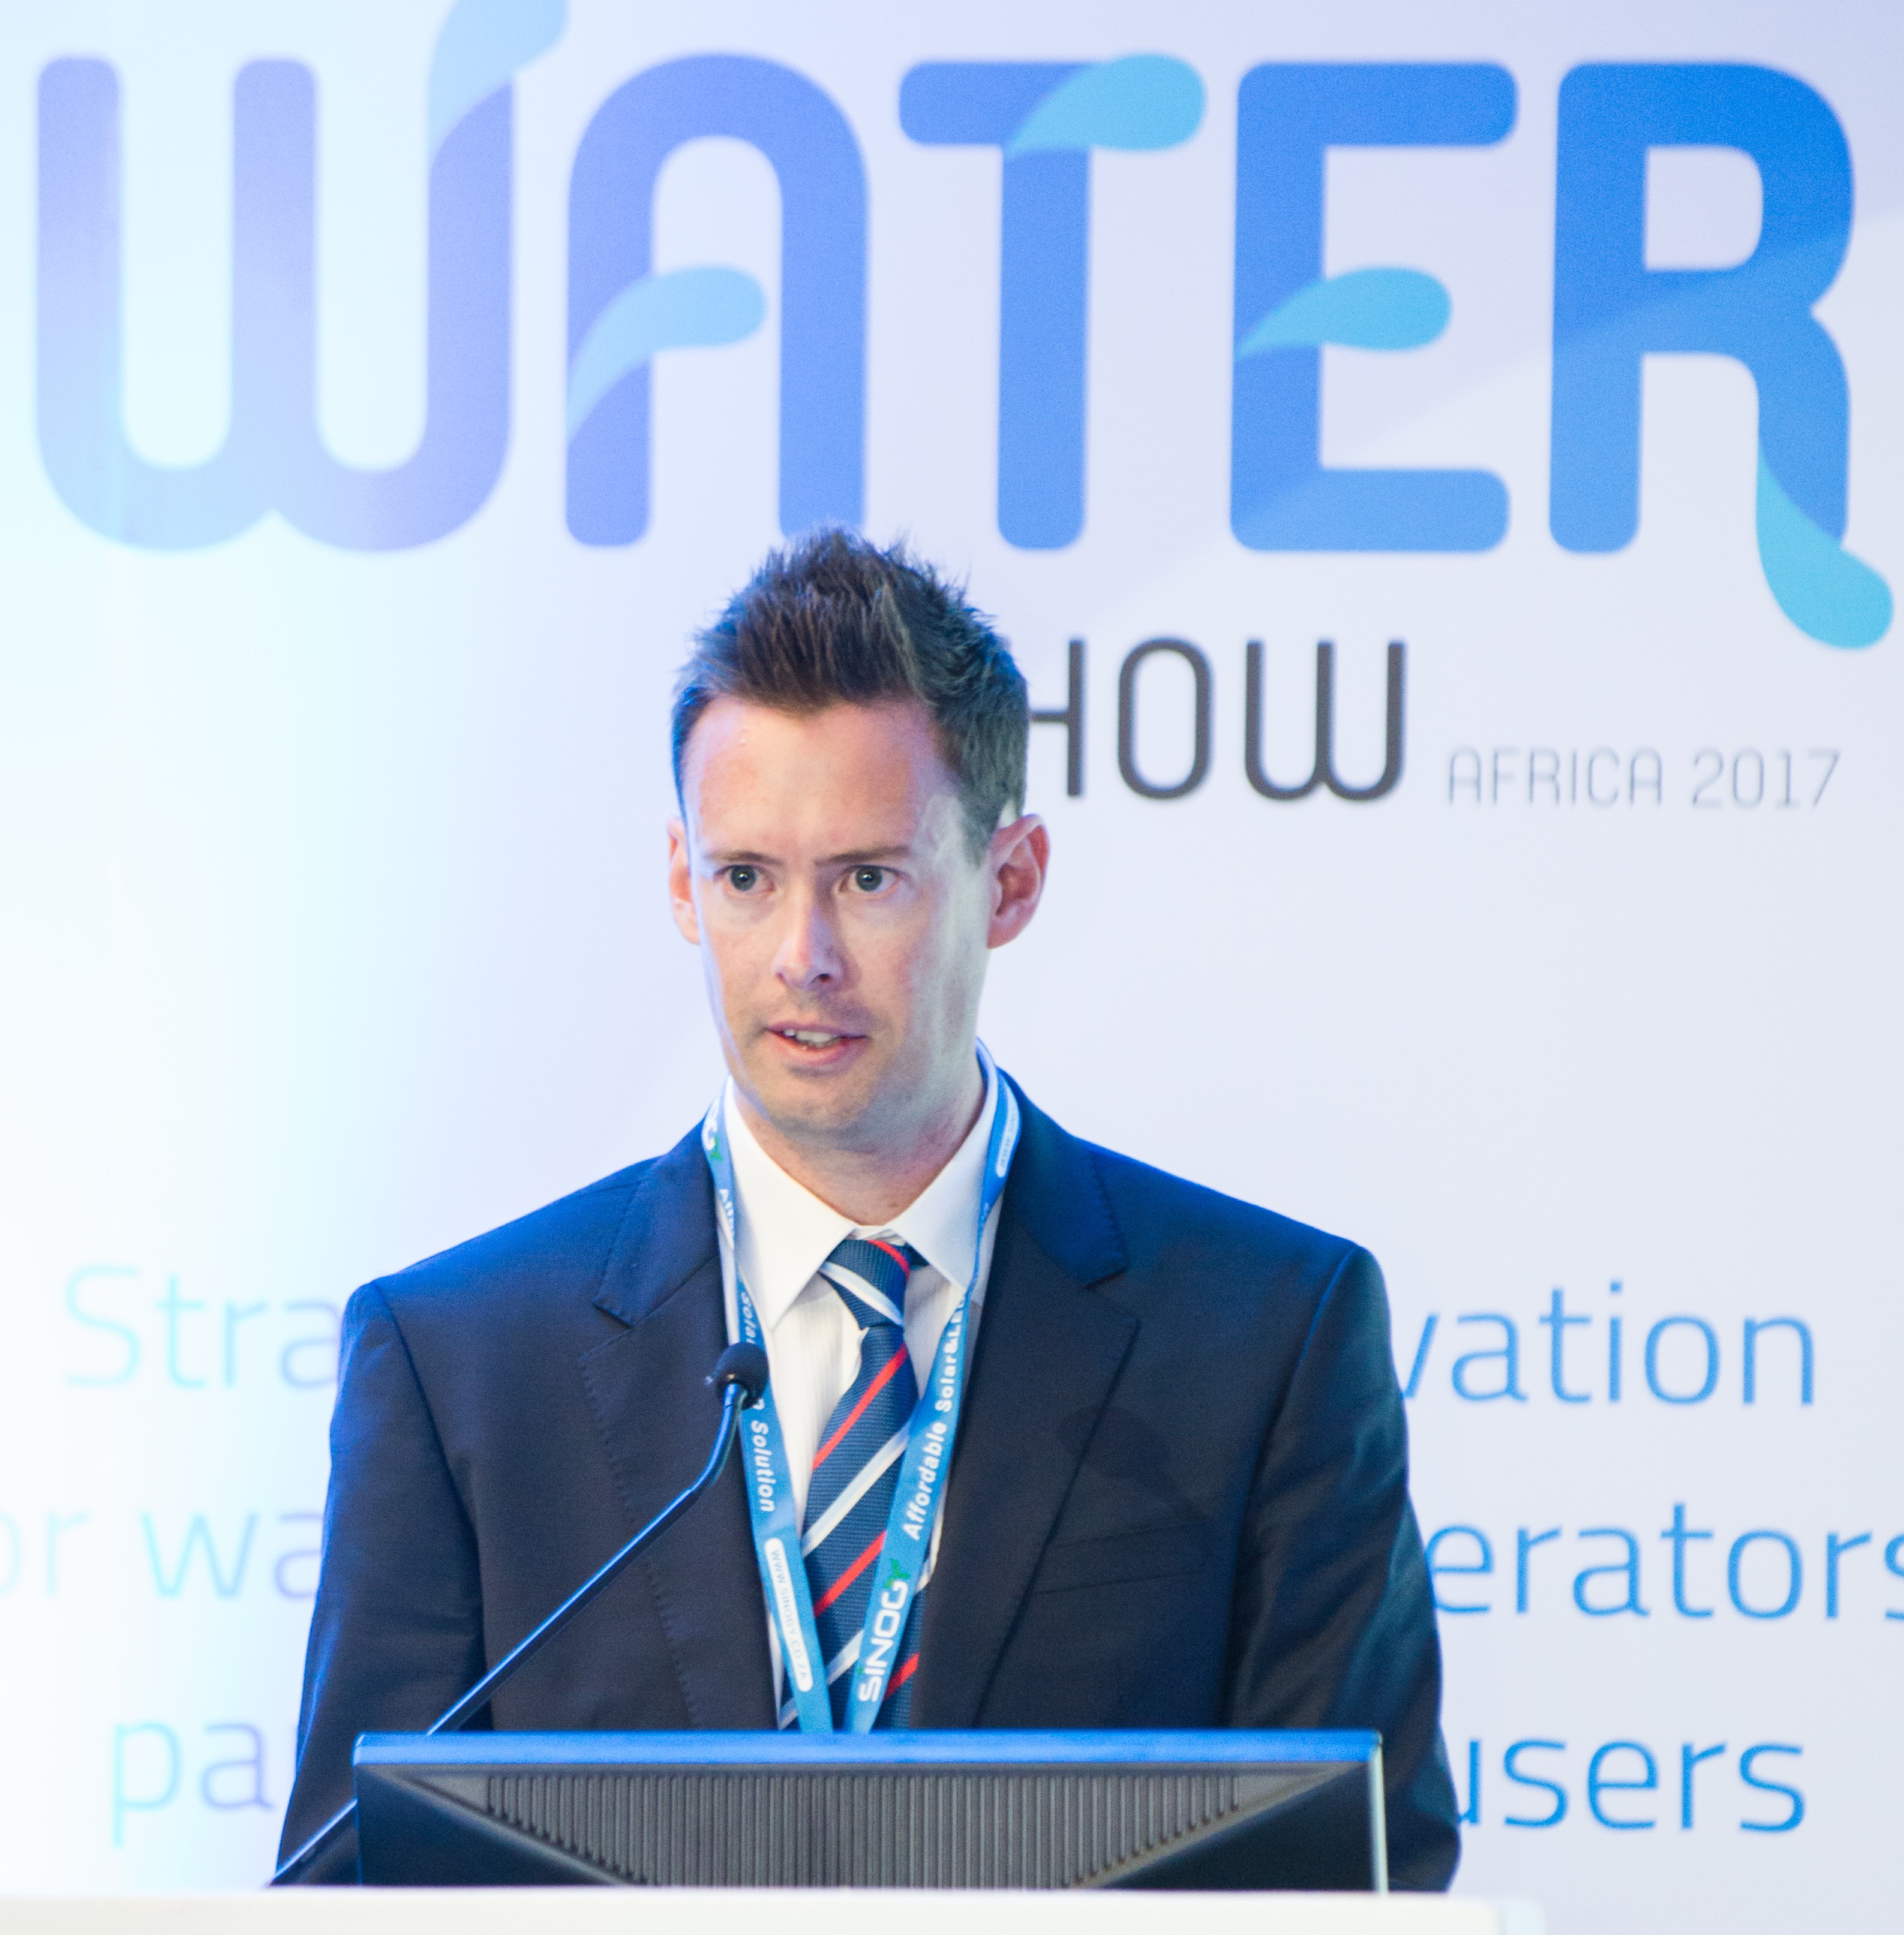 Robert Brears, Founder of Our Future Water, Young Water Leaders, Mitidaption & Author (Springer Nature, Wiley)